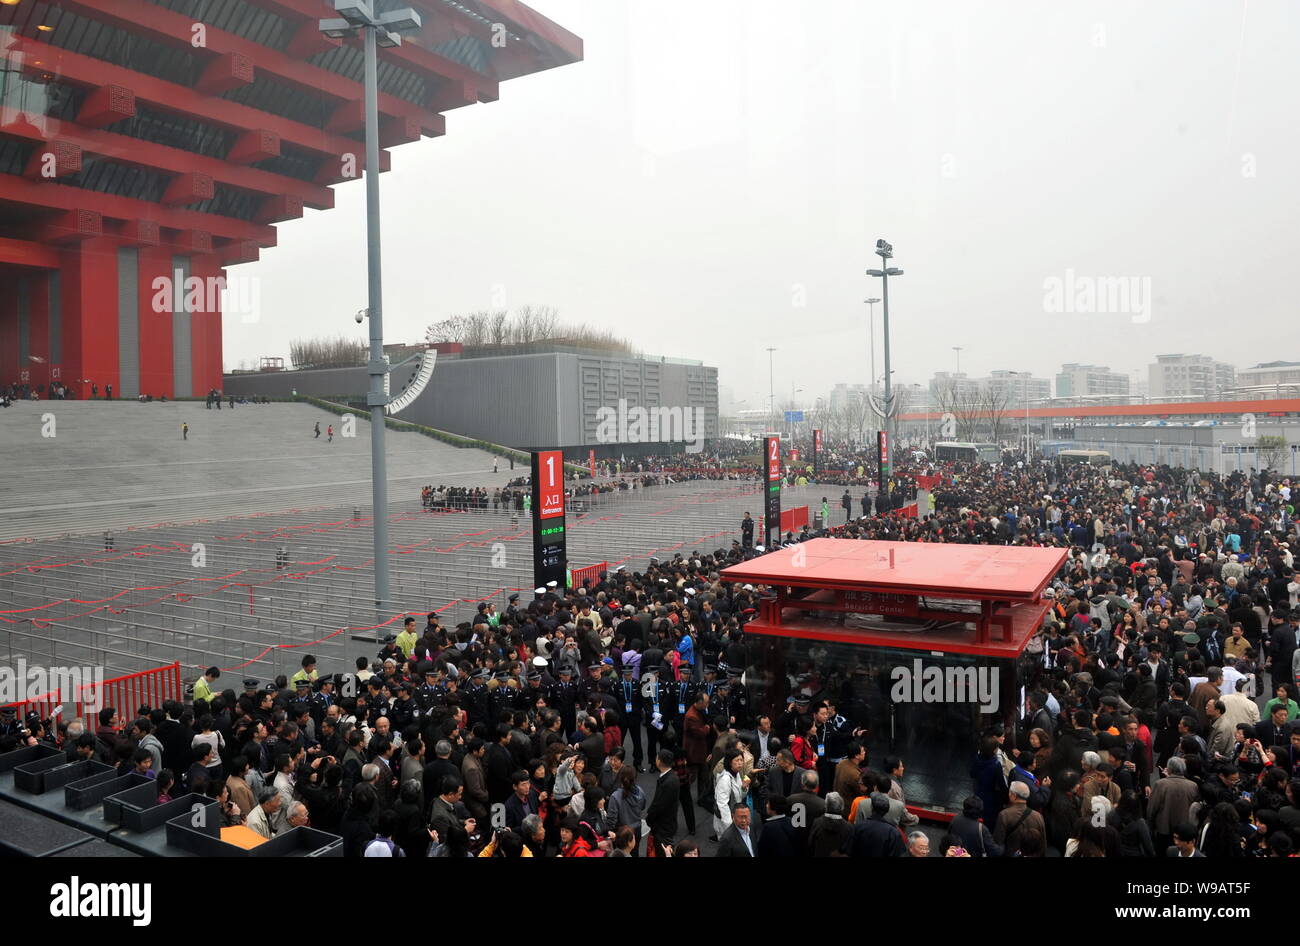 Crowds of visitors gather at the entrance of the China Pavilion in the Expo site in Shanghai, China, April 20, 2010.   From the outset, organisers of Stock Photo